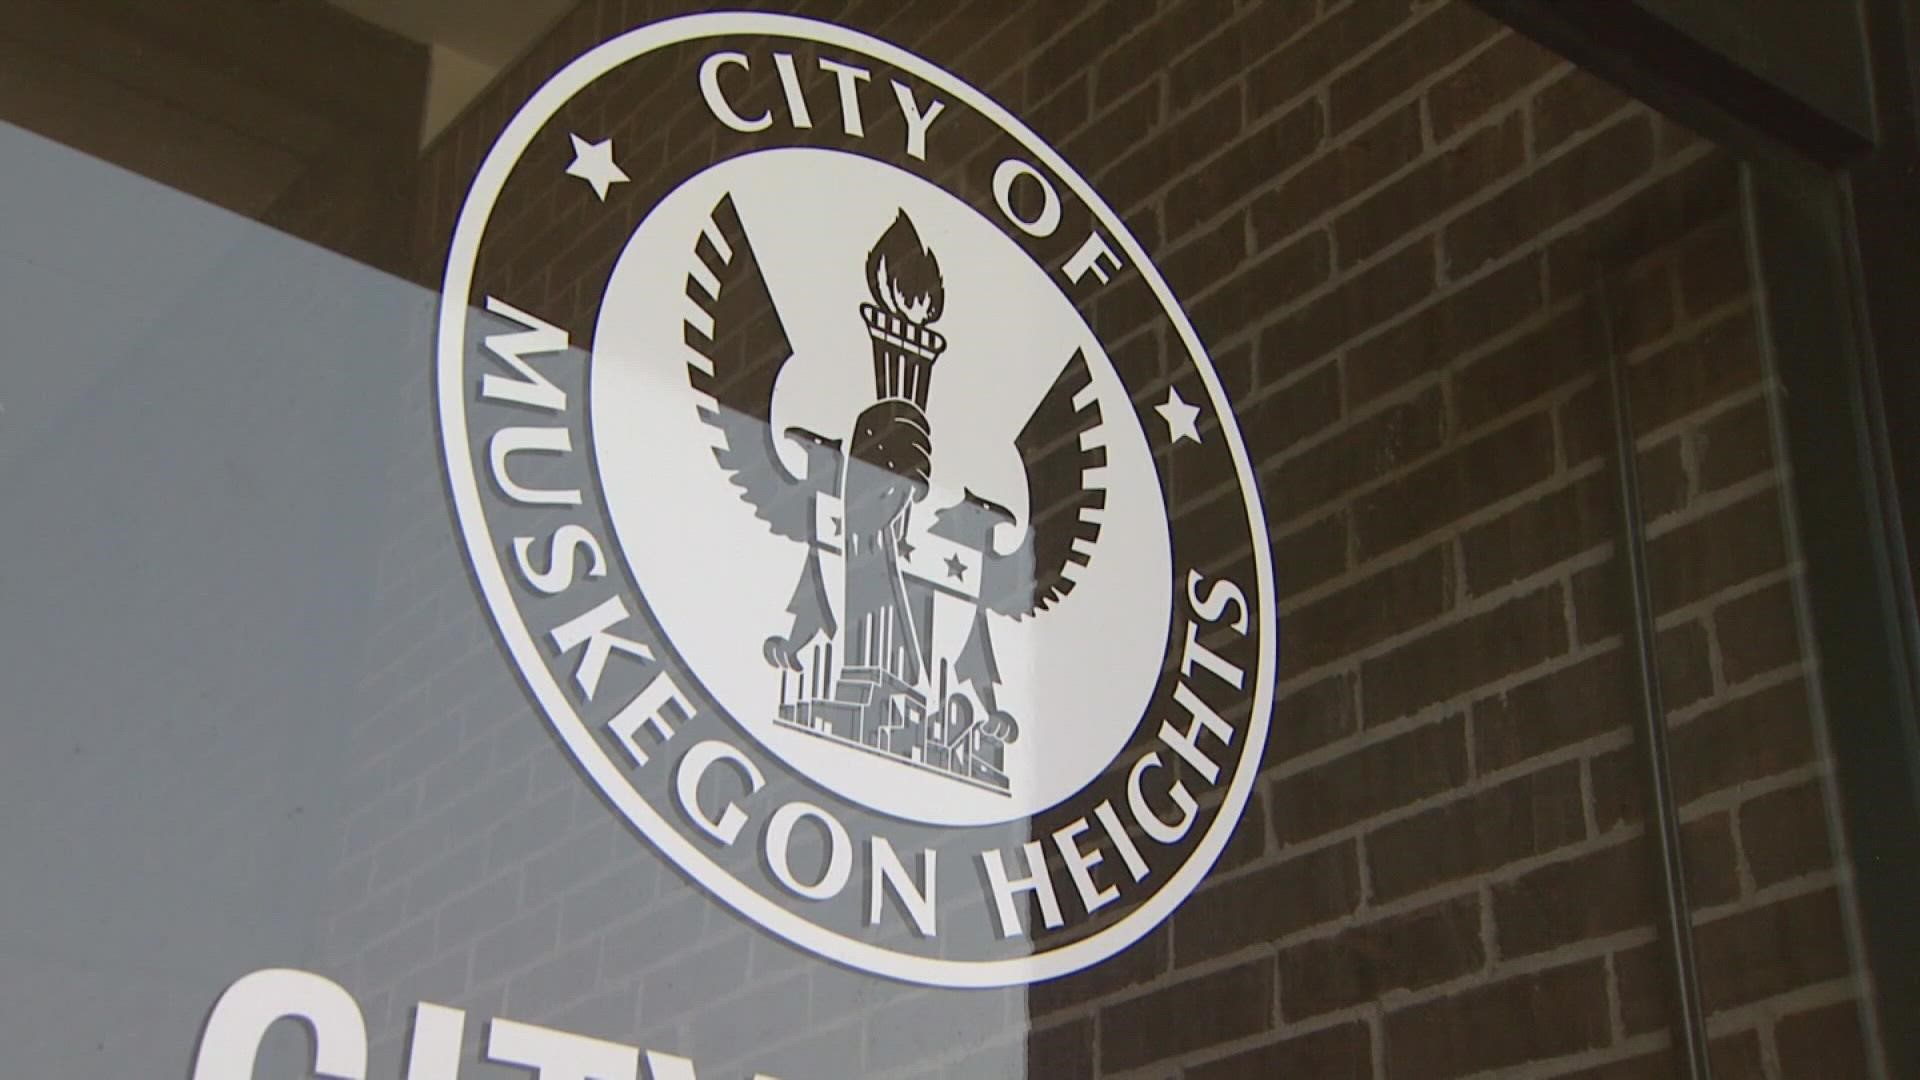 The city of Muskegon Heights received a $615,900 state grant to develop a strategic plan to remove lead pipes and connections from the water system.